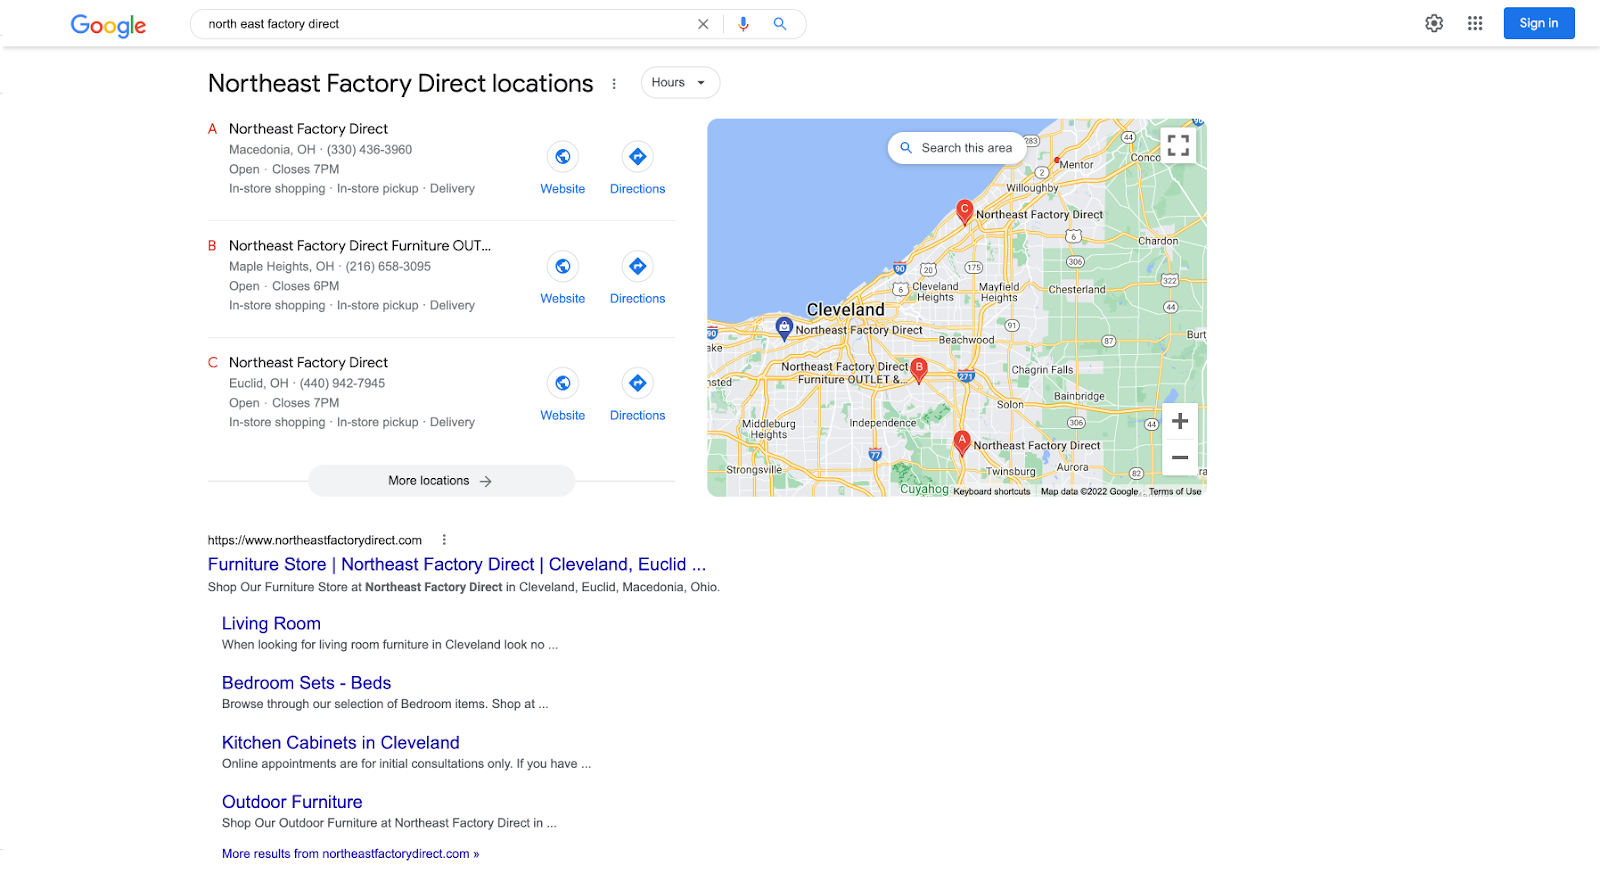 Northeast Factory Direct Google Search